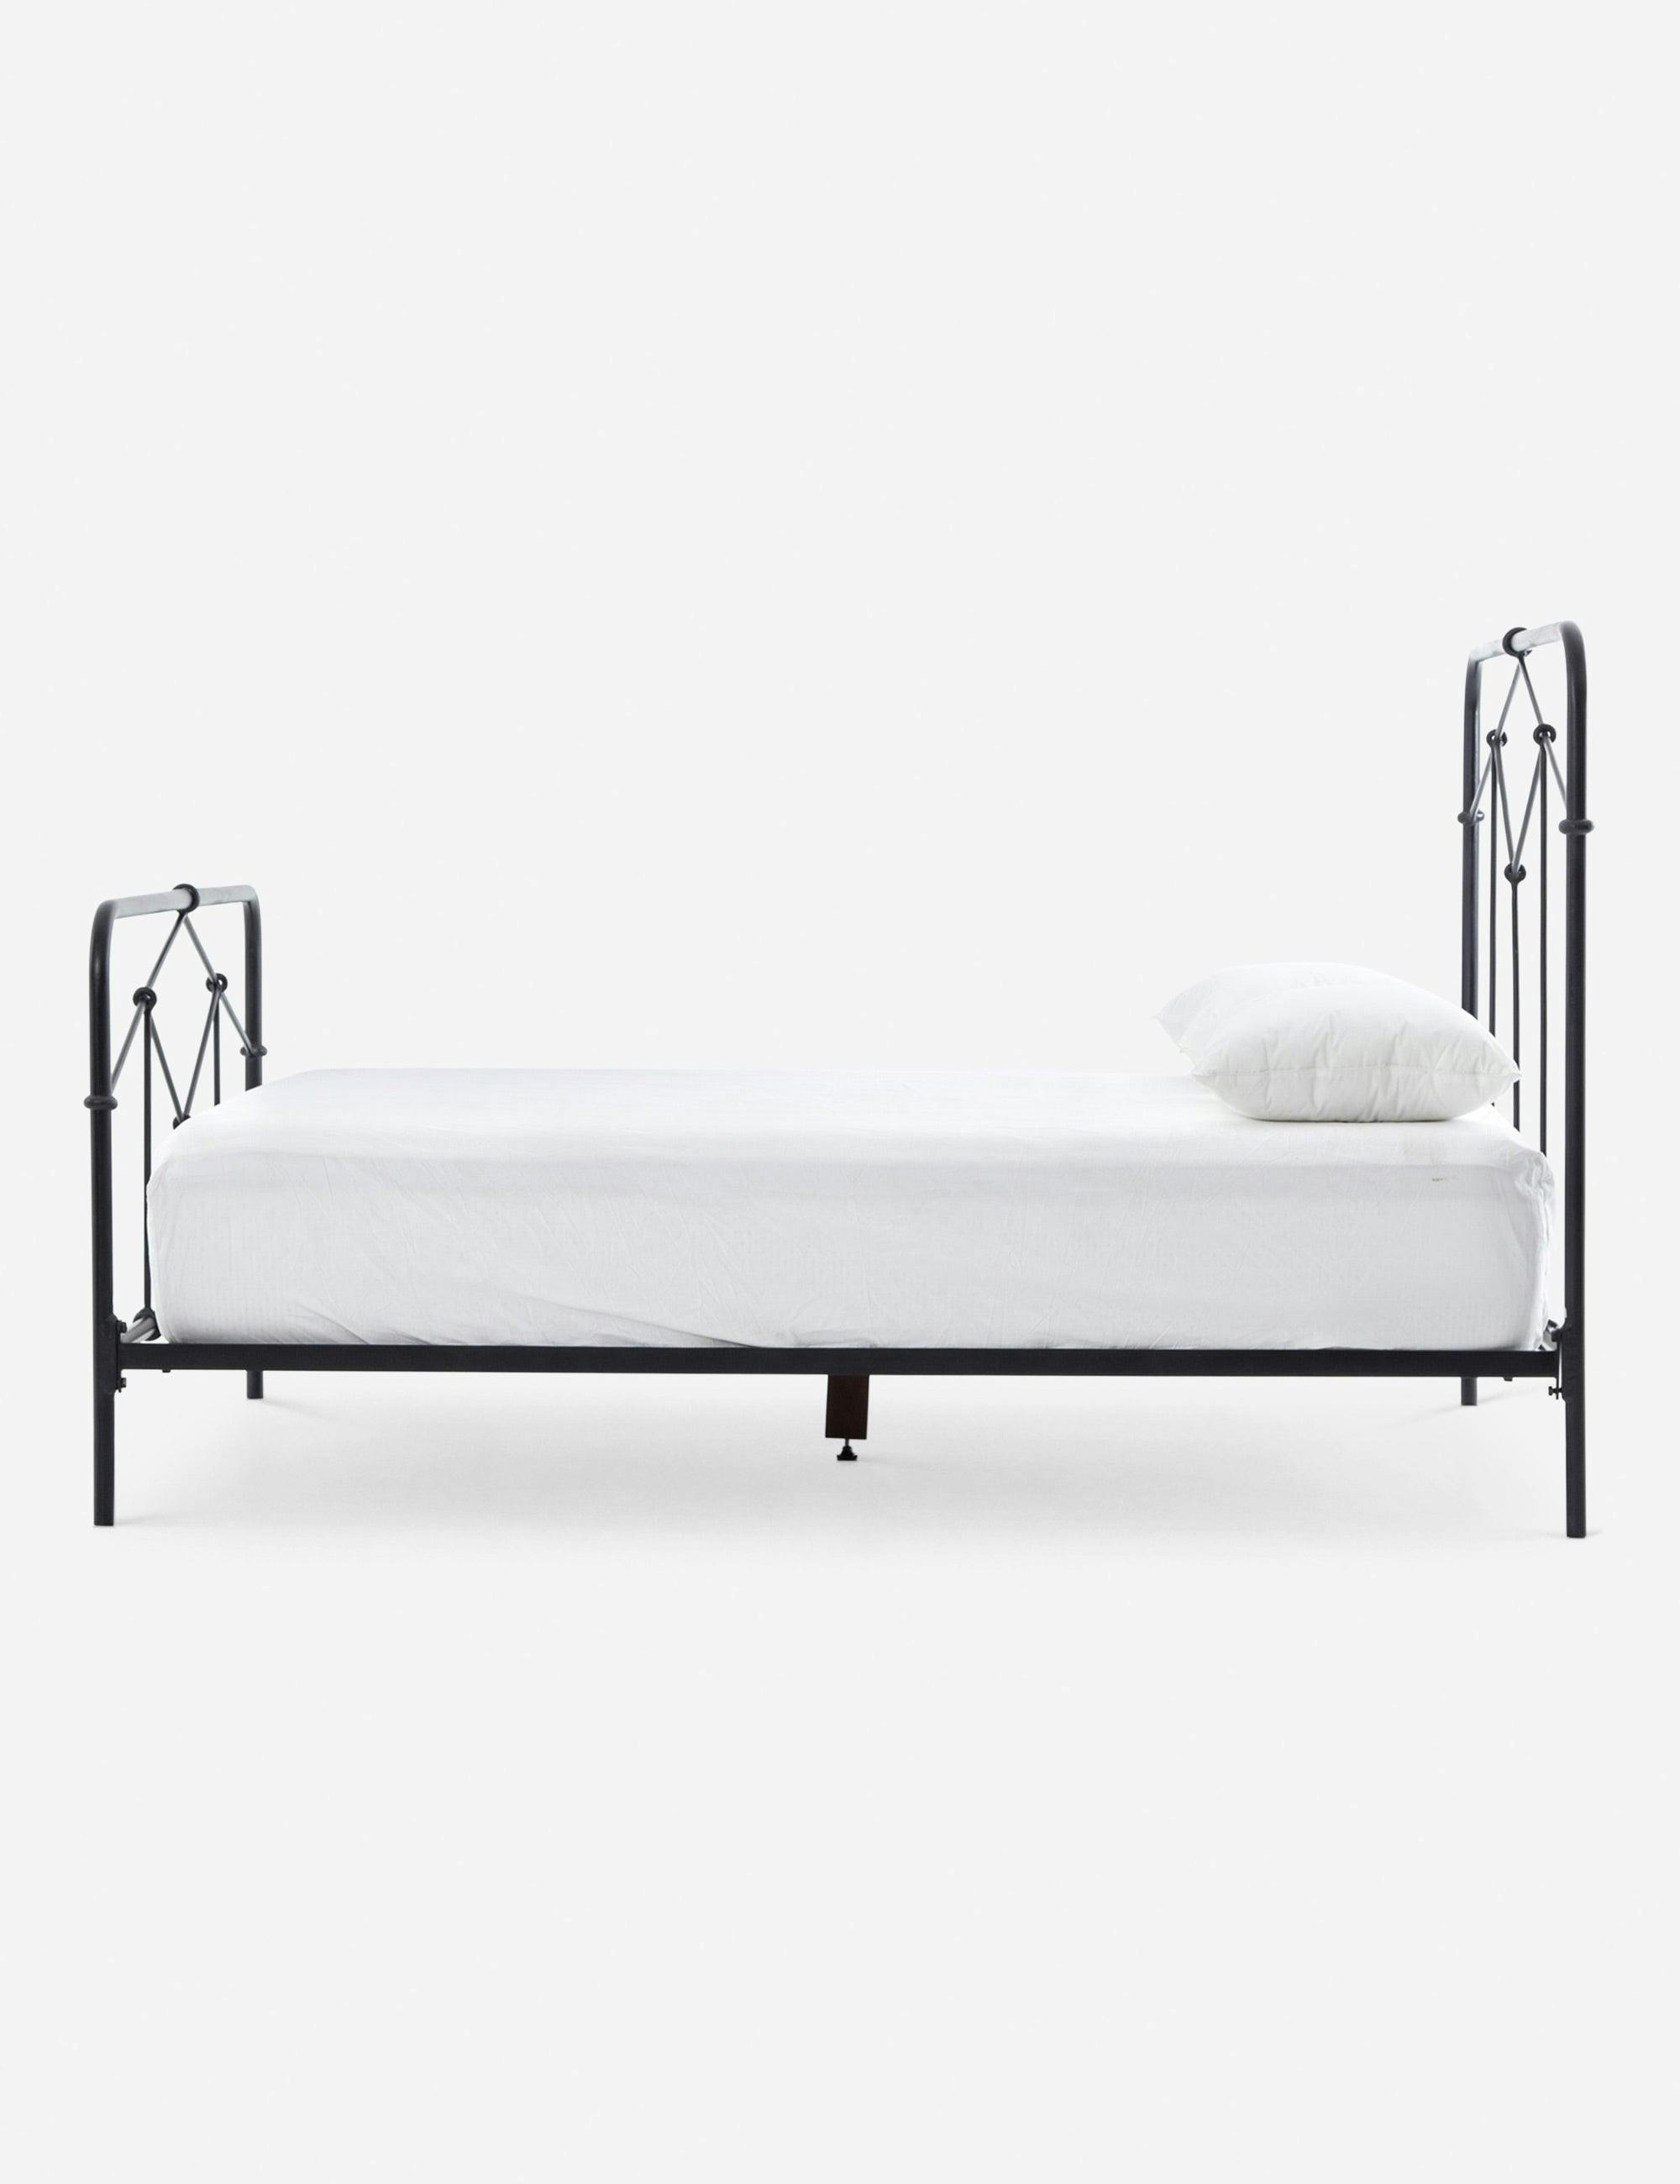 Maddie Vintage-Inspired Iron Tubing Queen Bed in Black